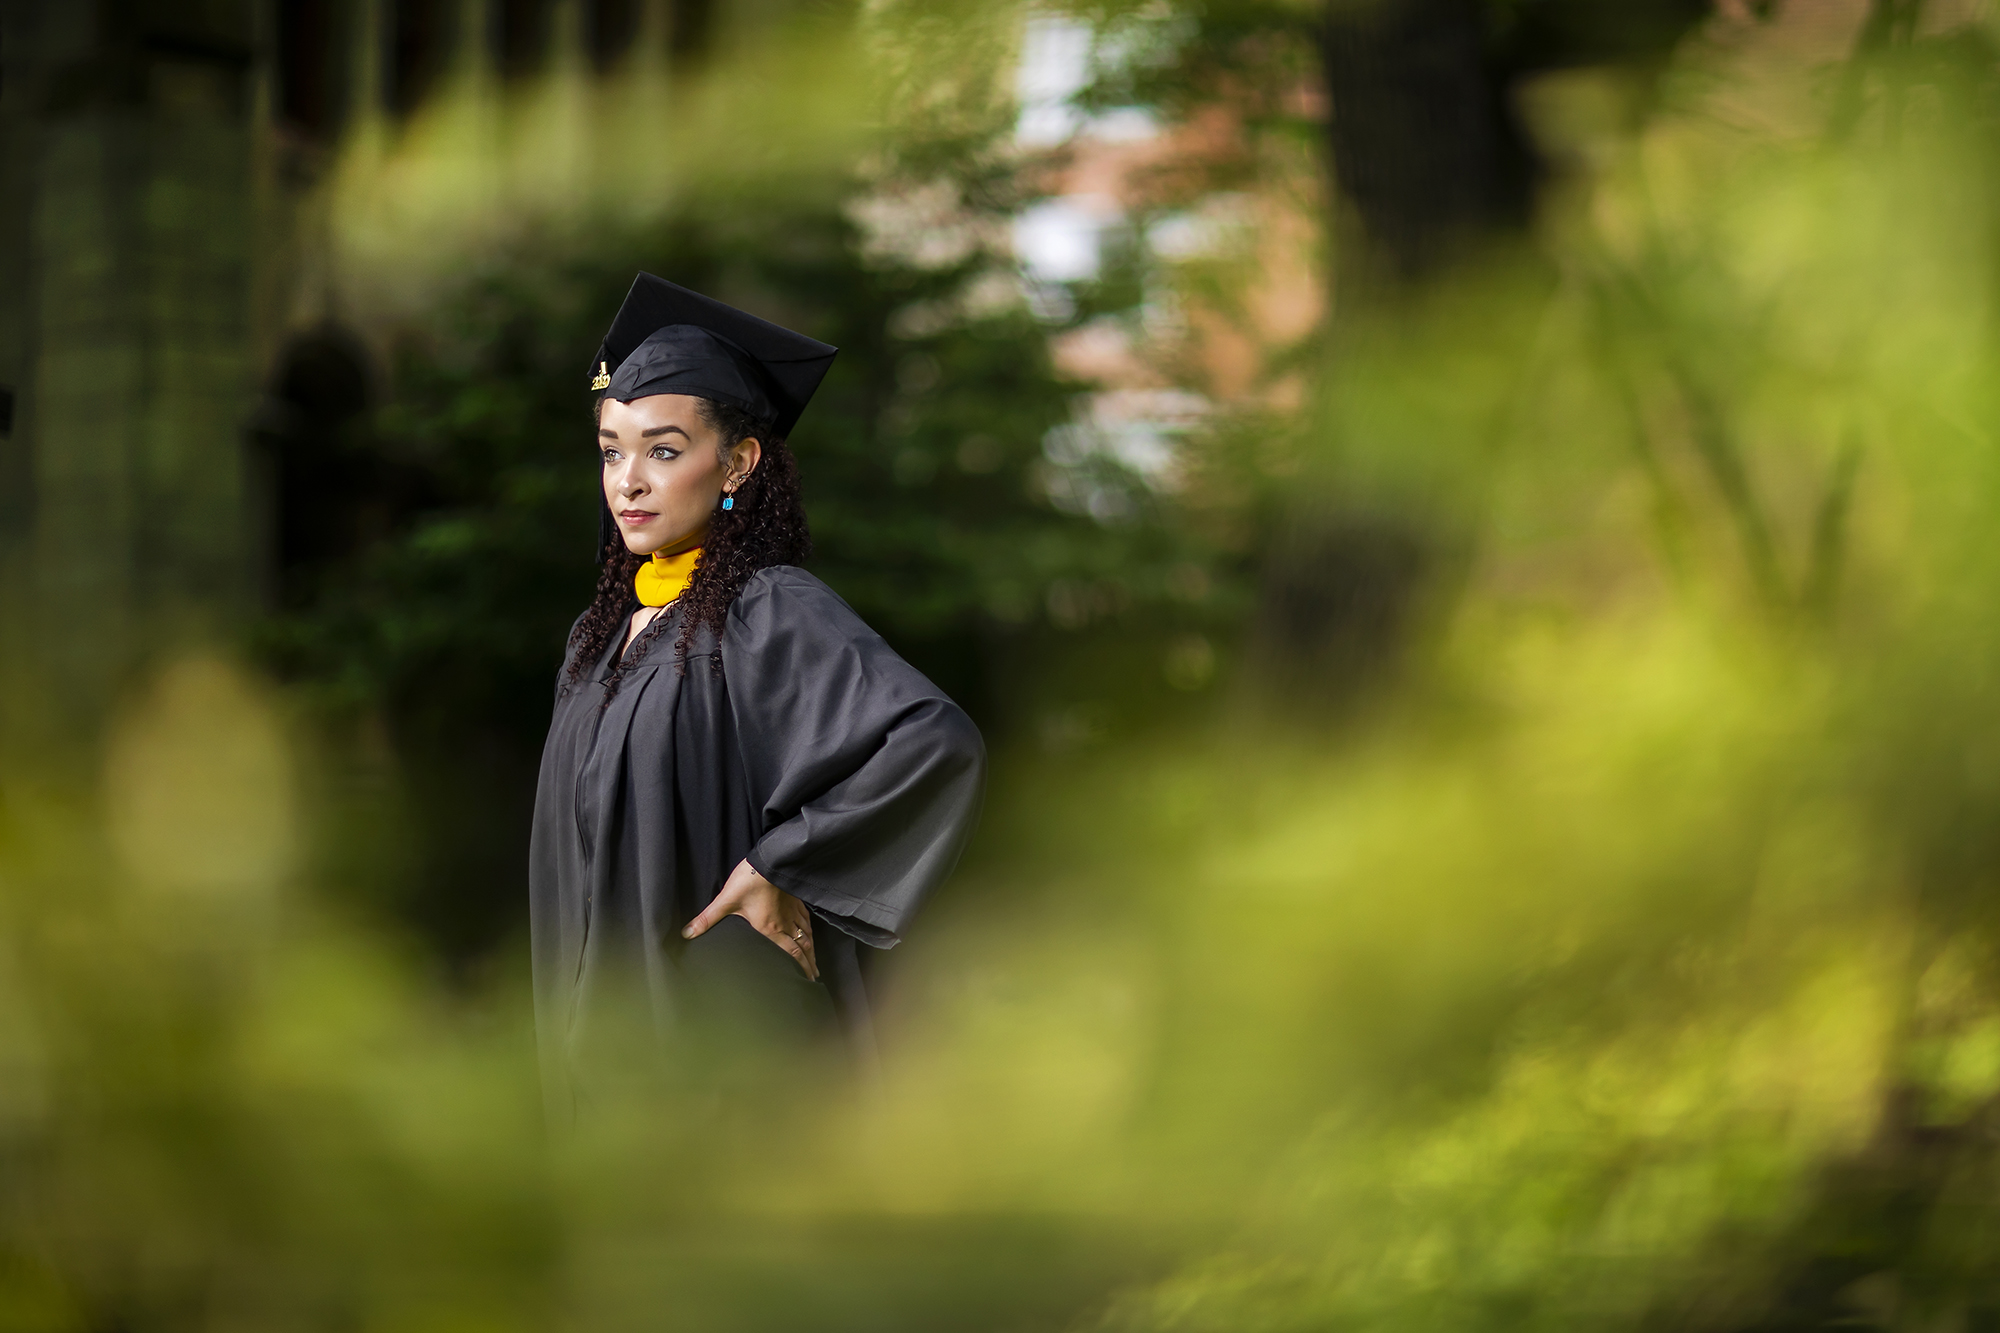 siani woods at commencement 2020